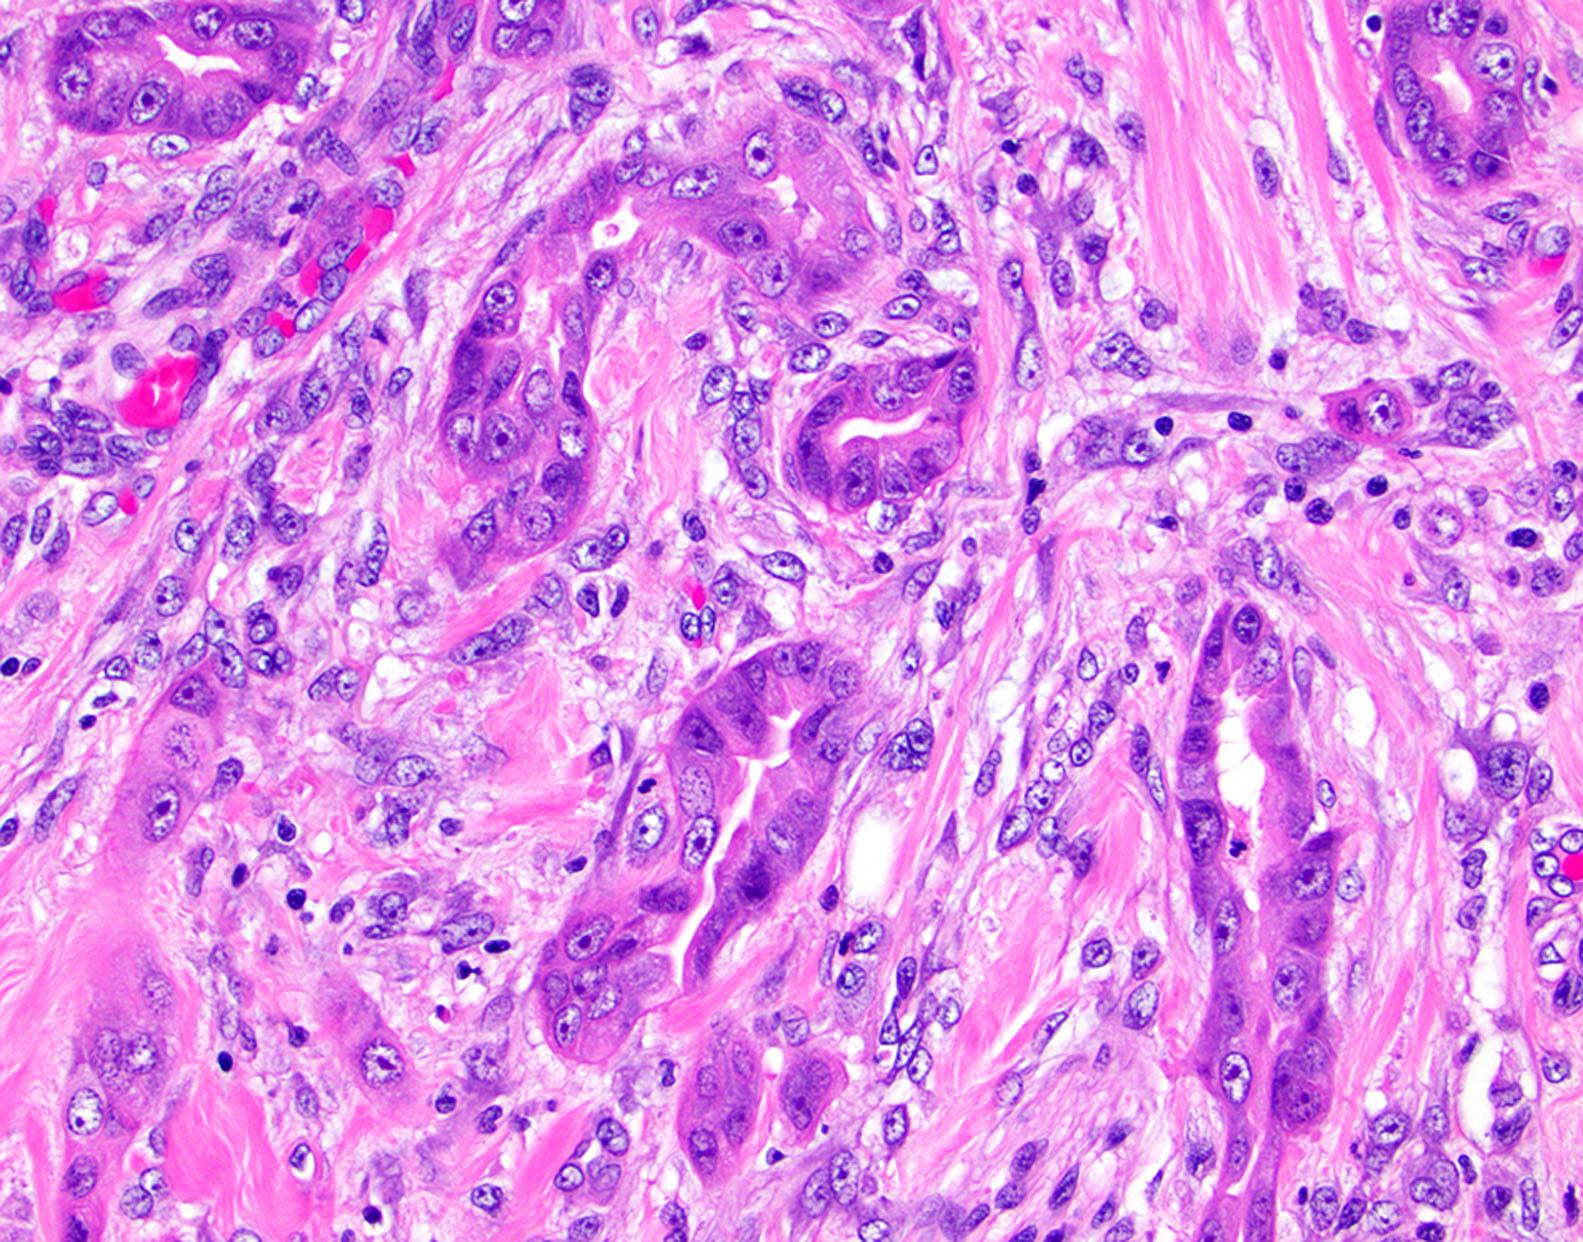 Figure 6.17, Ampullary adenocarcinoma, pancreaticobiliary type, characterized by small glands lined by cuboidal eosinophilic epithelium with irregular nuclear.